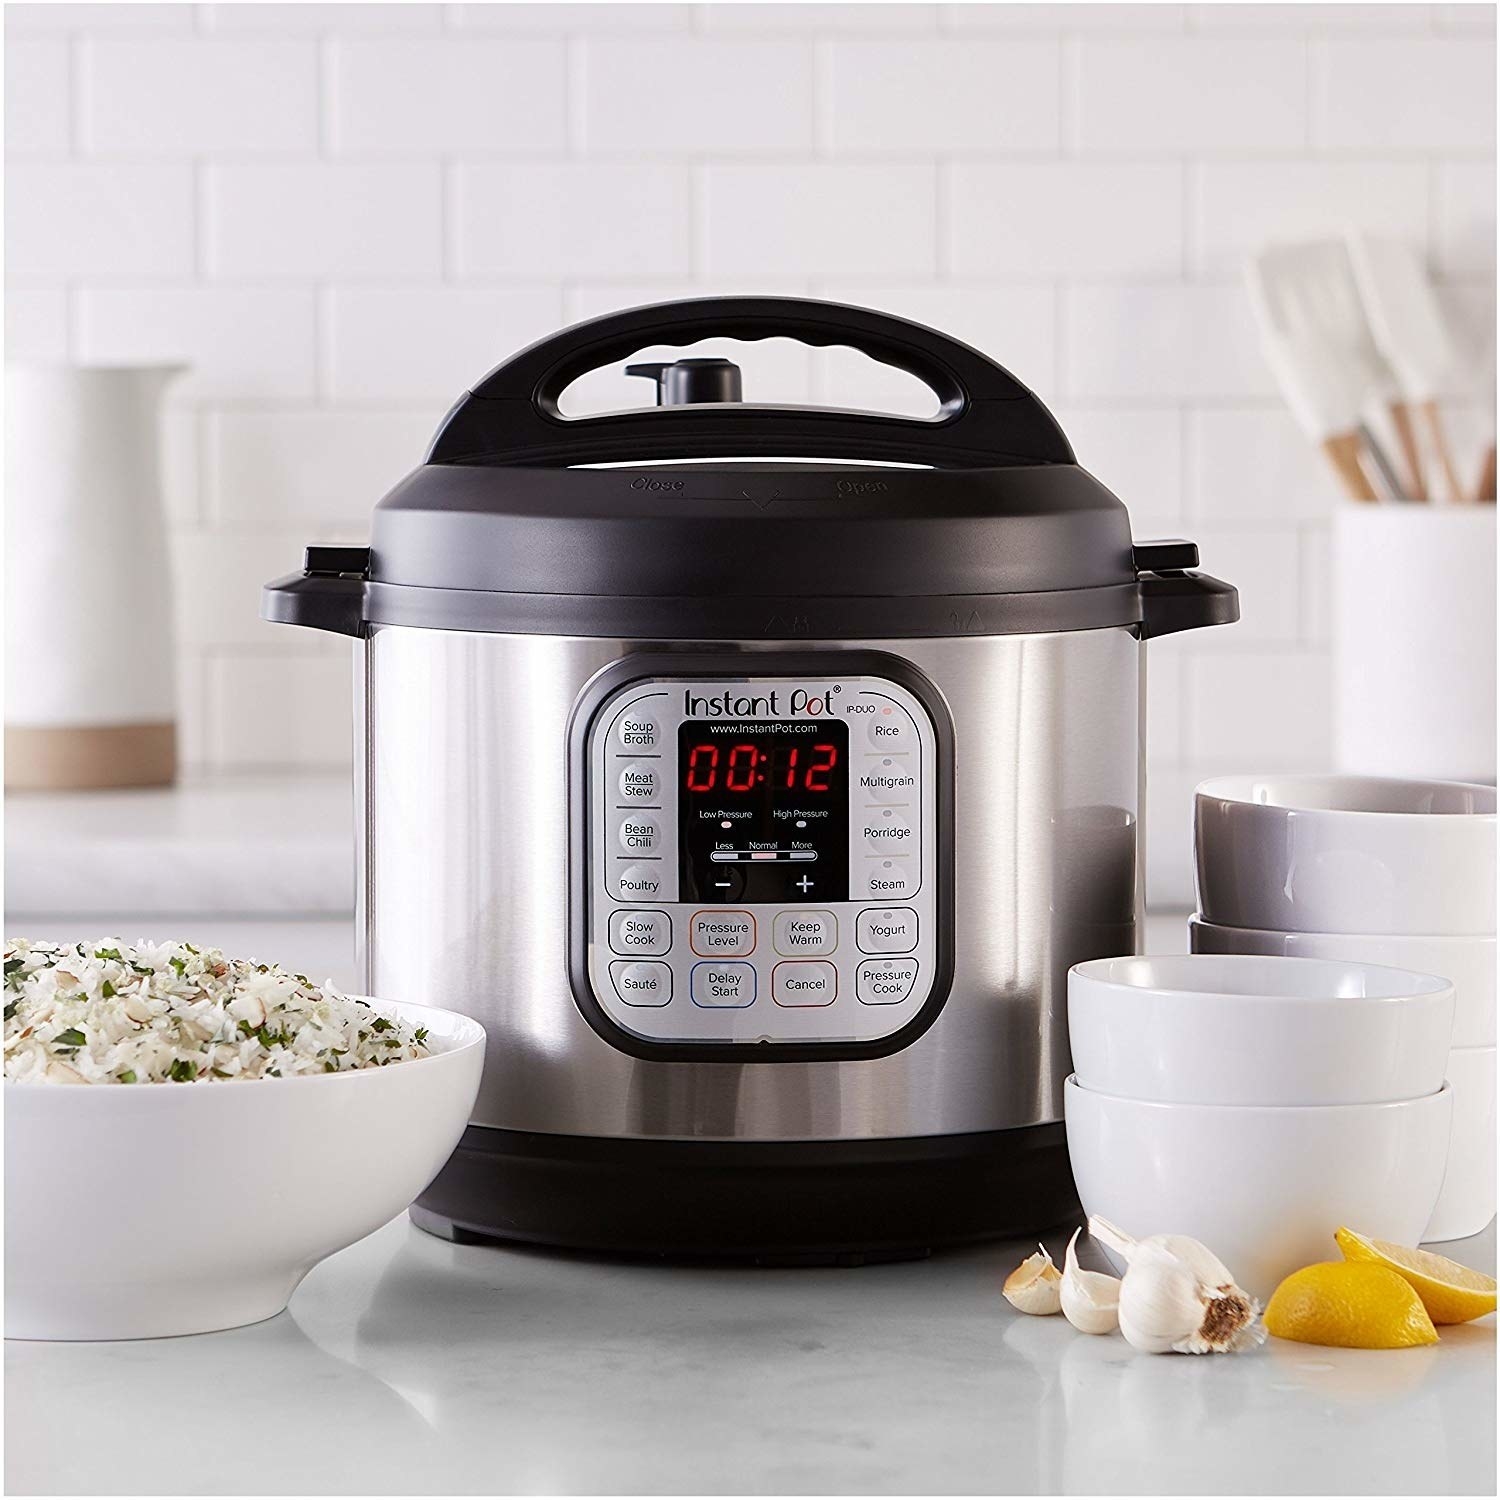 The Instant Pot on a counter